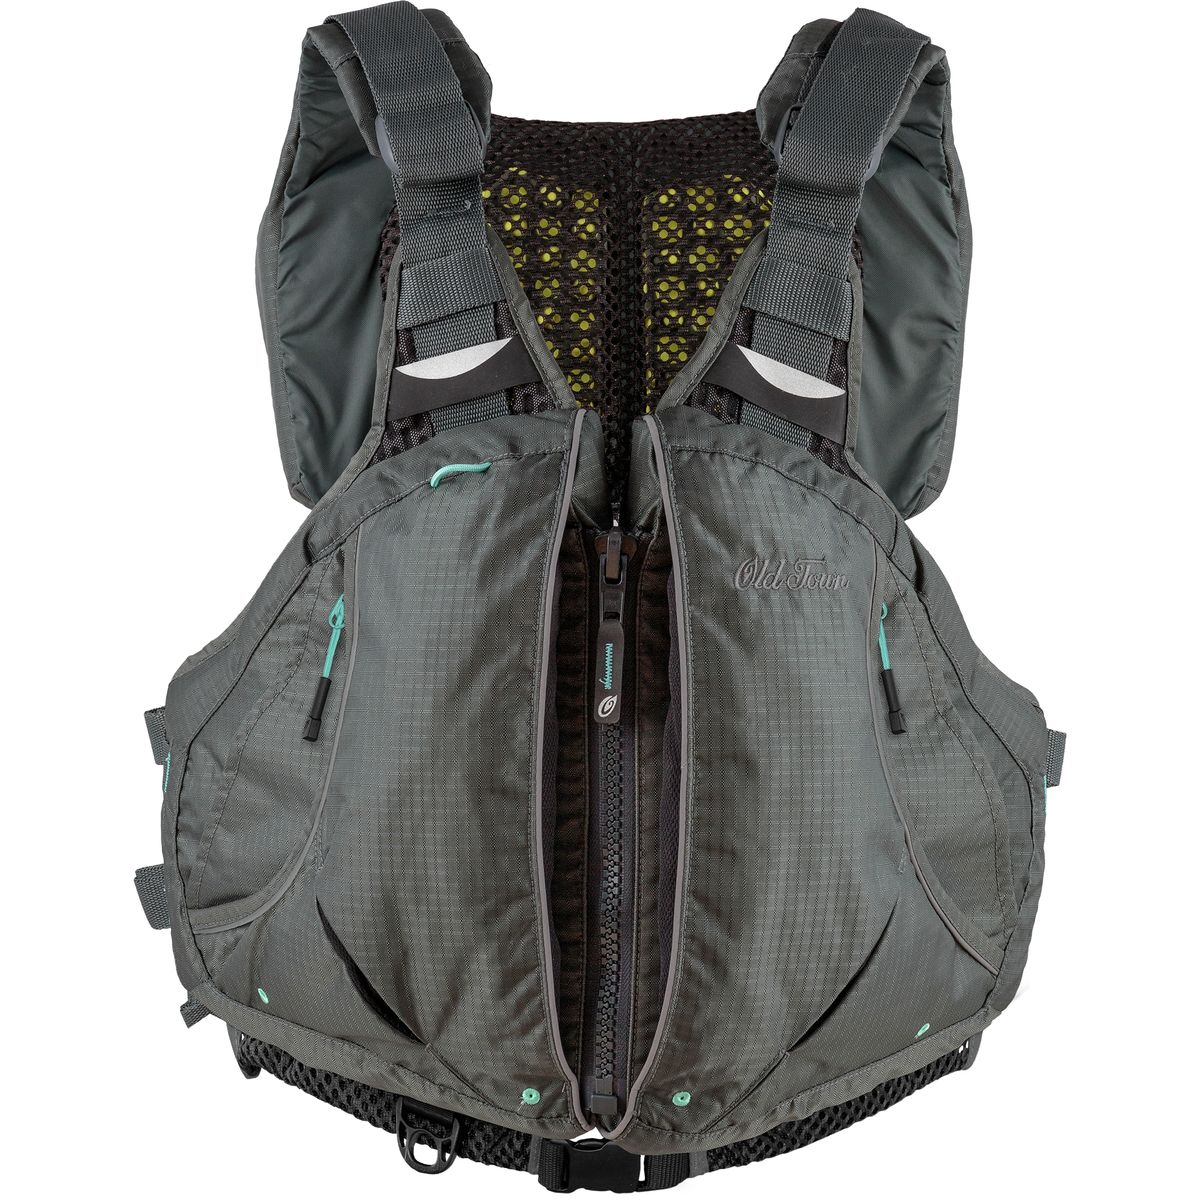 Old Town Solitude Personal Flotation Device - Women's